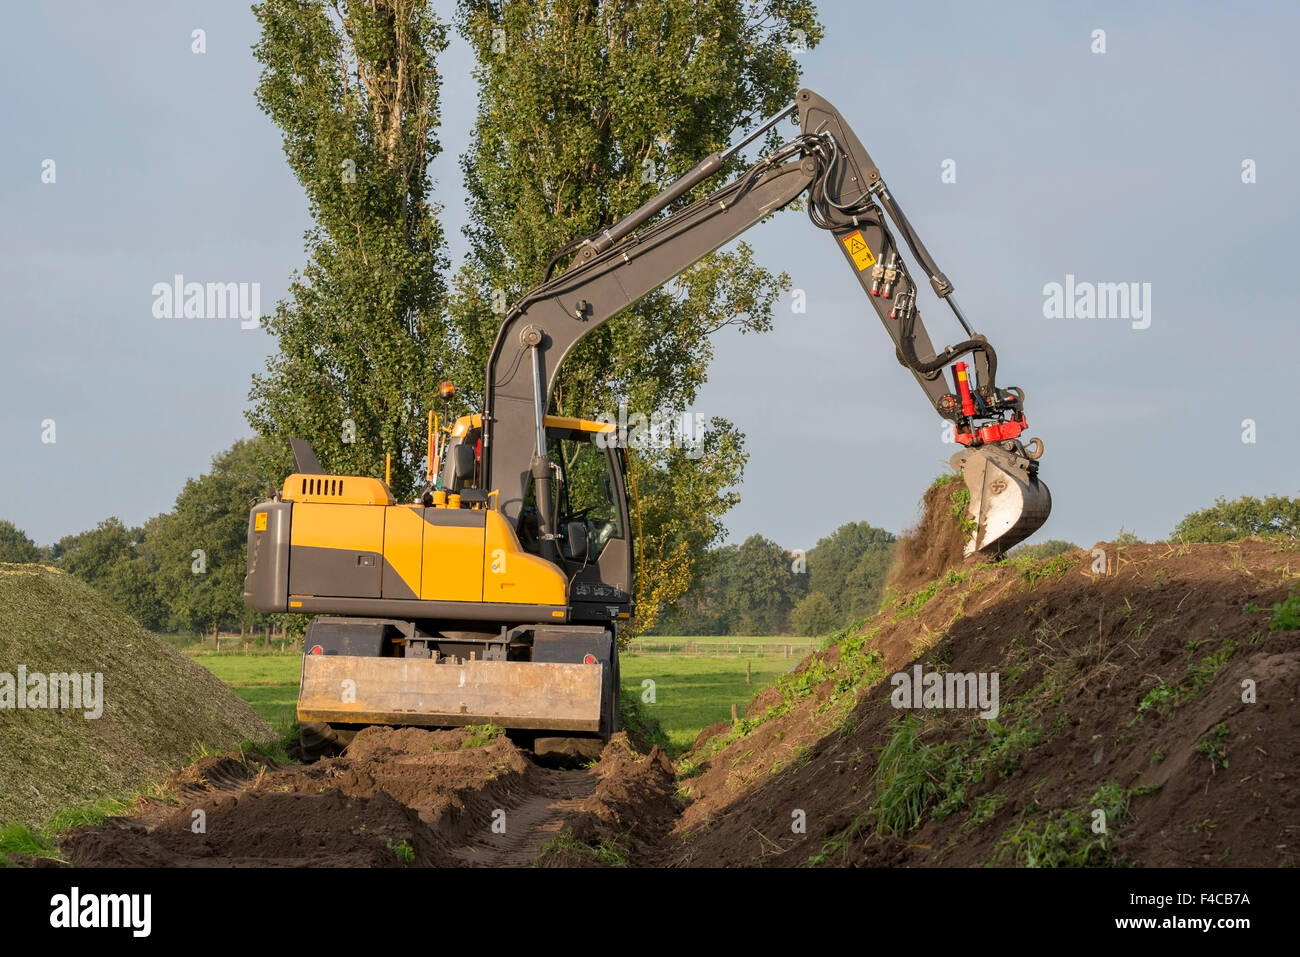 Agriculture shredded corn silage with an excavator in the Netherlands Stock Photo